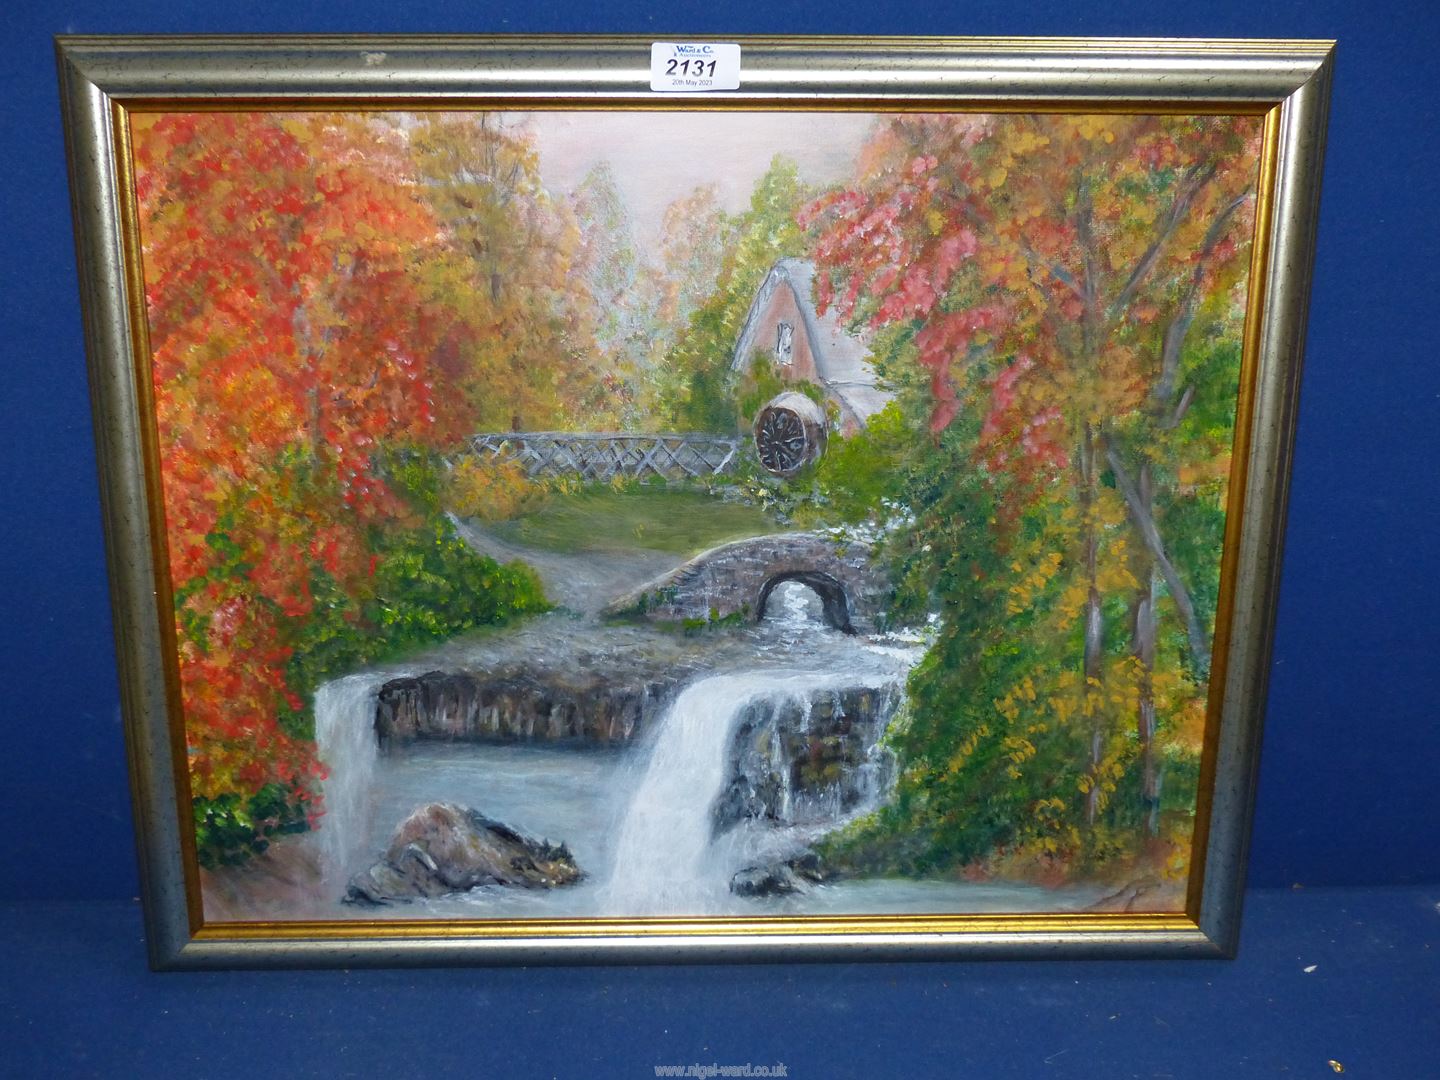 A framed Oil on canvas depicting a Water Mill, label verso 'Old Mill Stream' by Marjorie Lambeth.